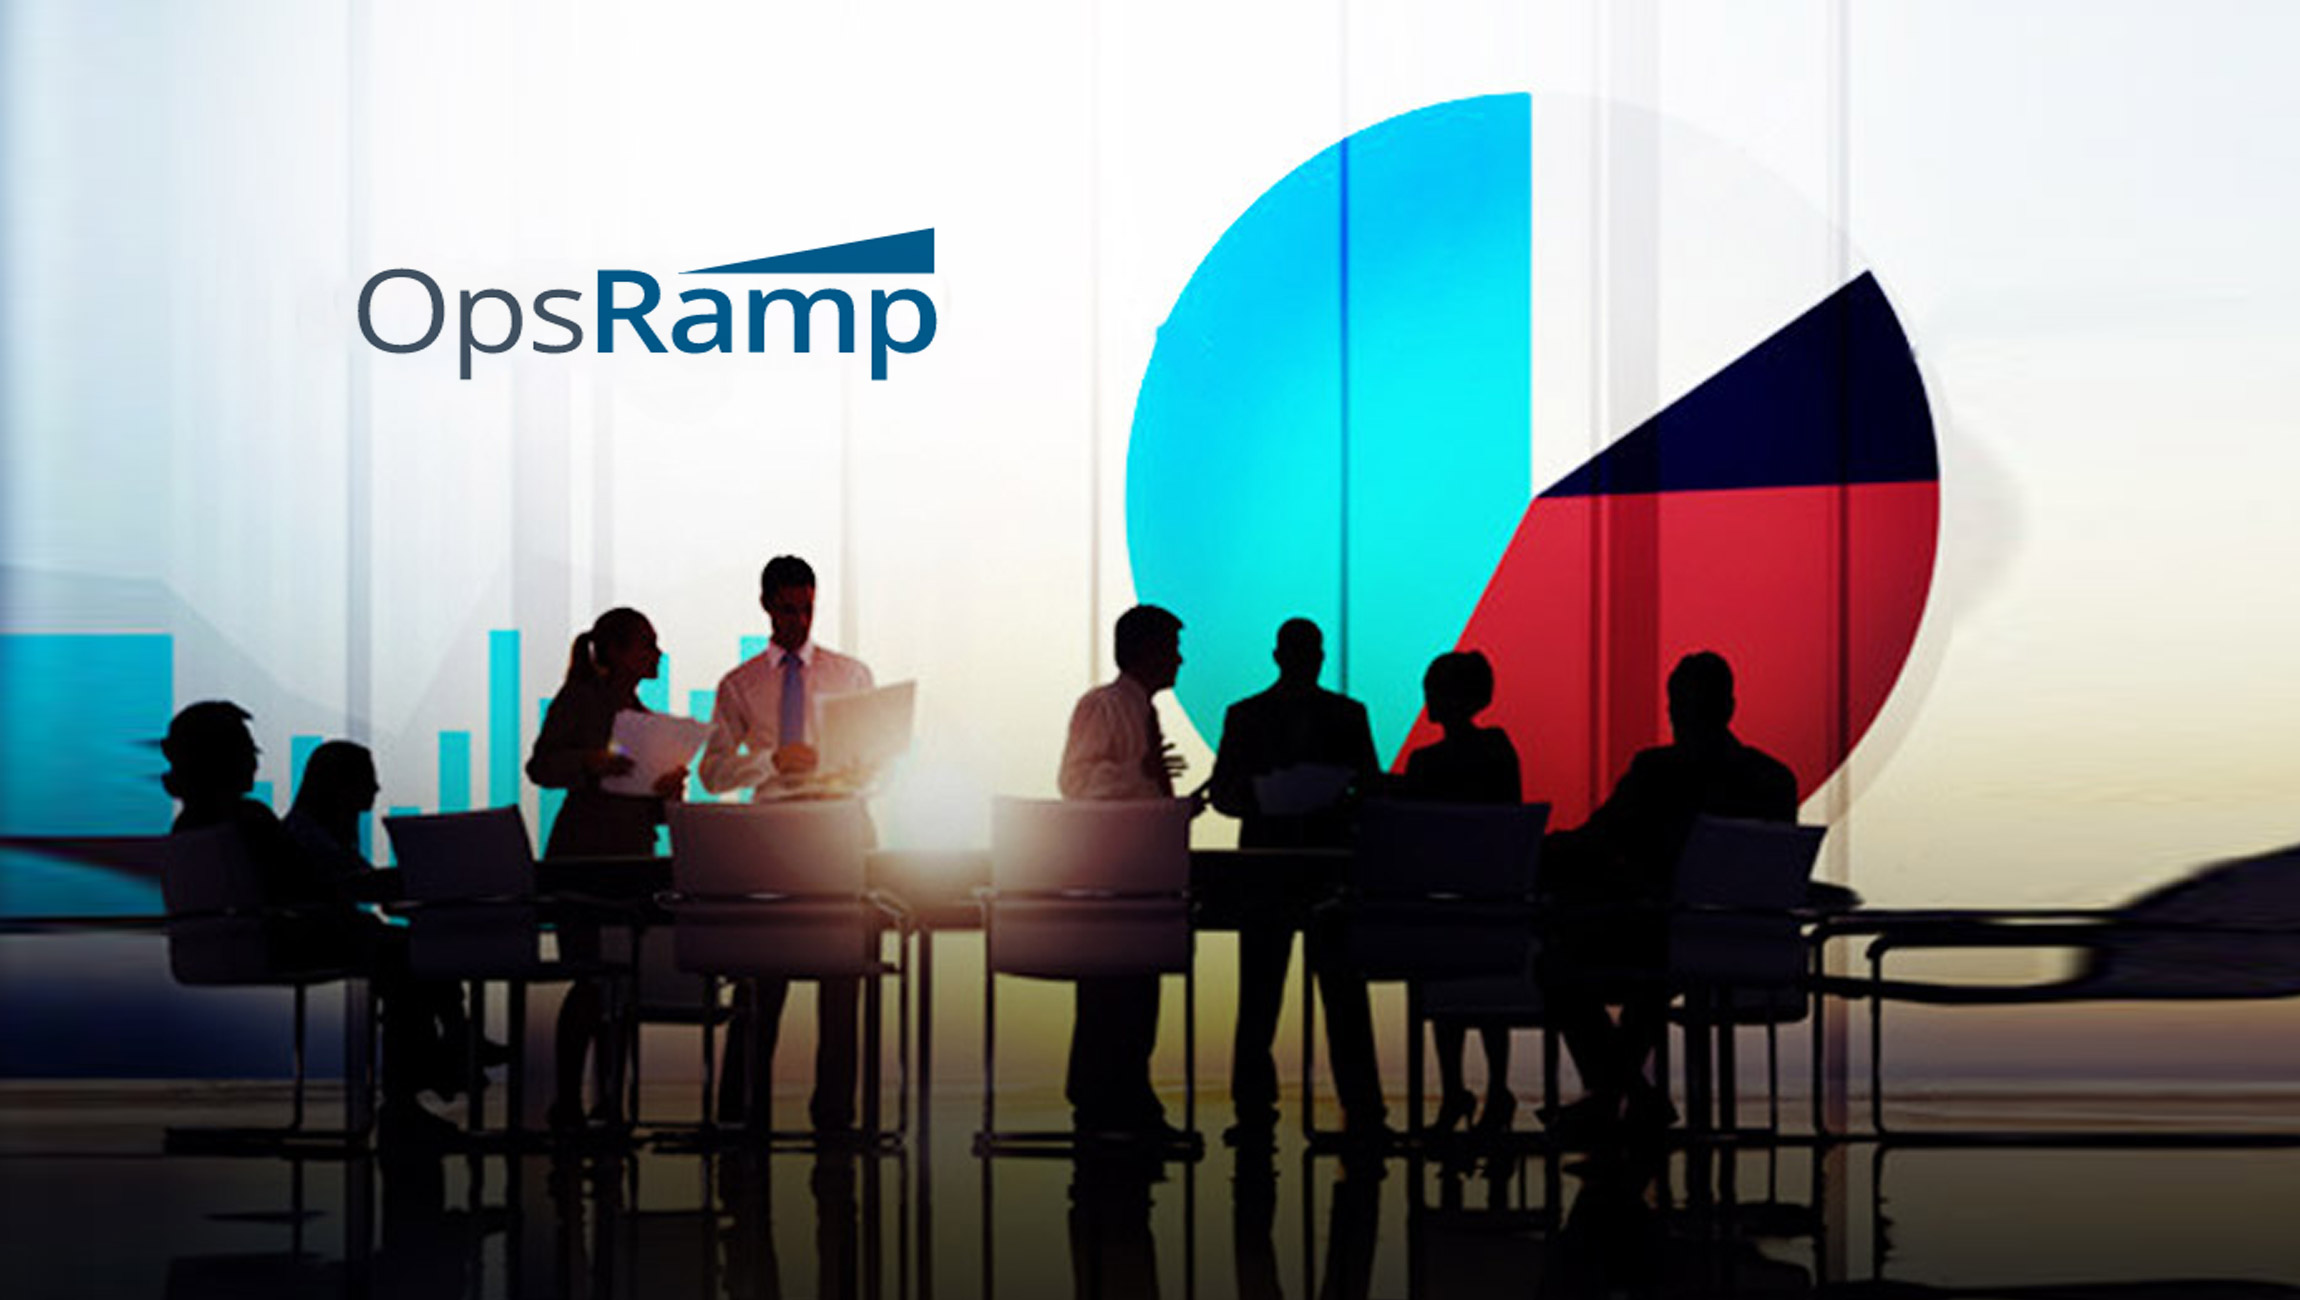 OpsRamp Named a Market Leader in Observability in Independent Analyst Firm’s Report